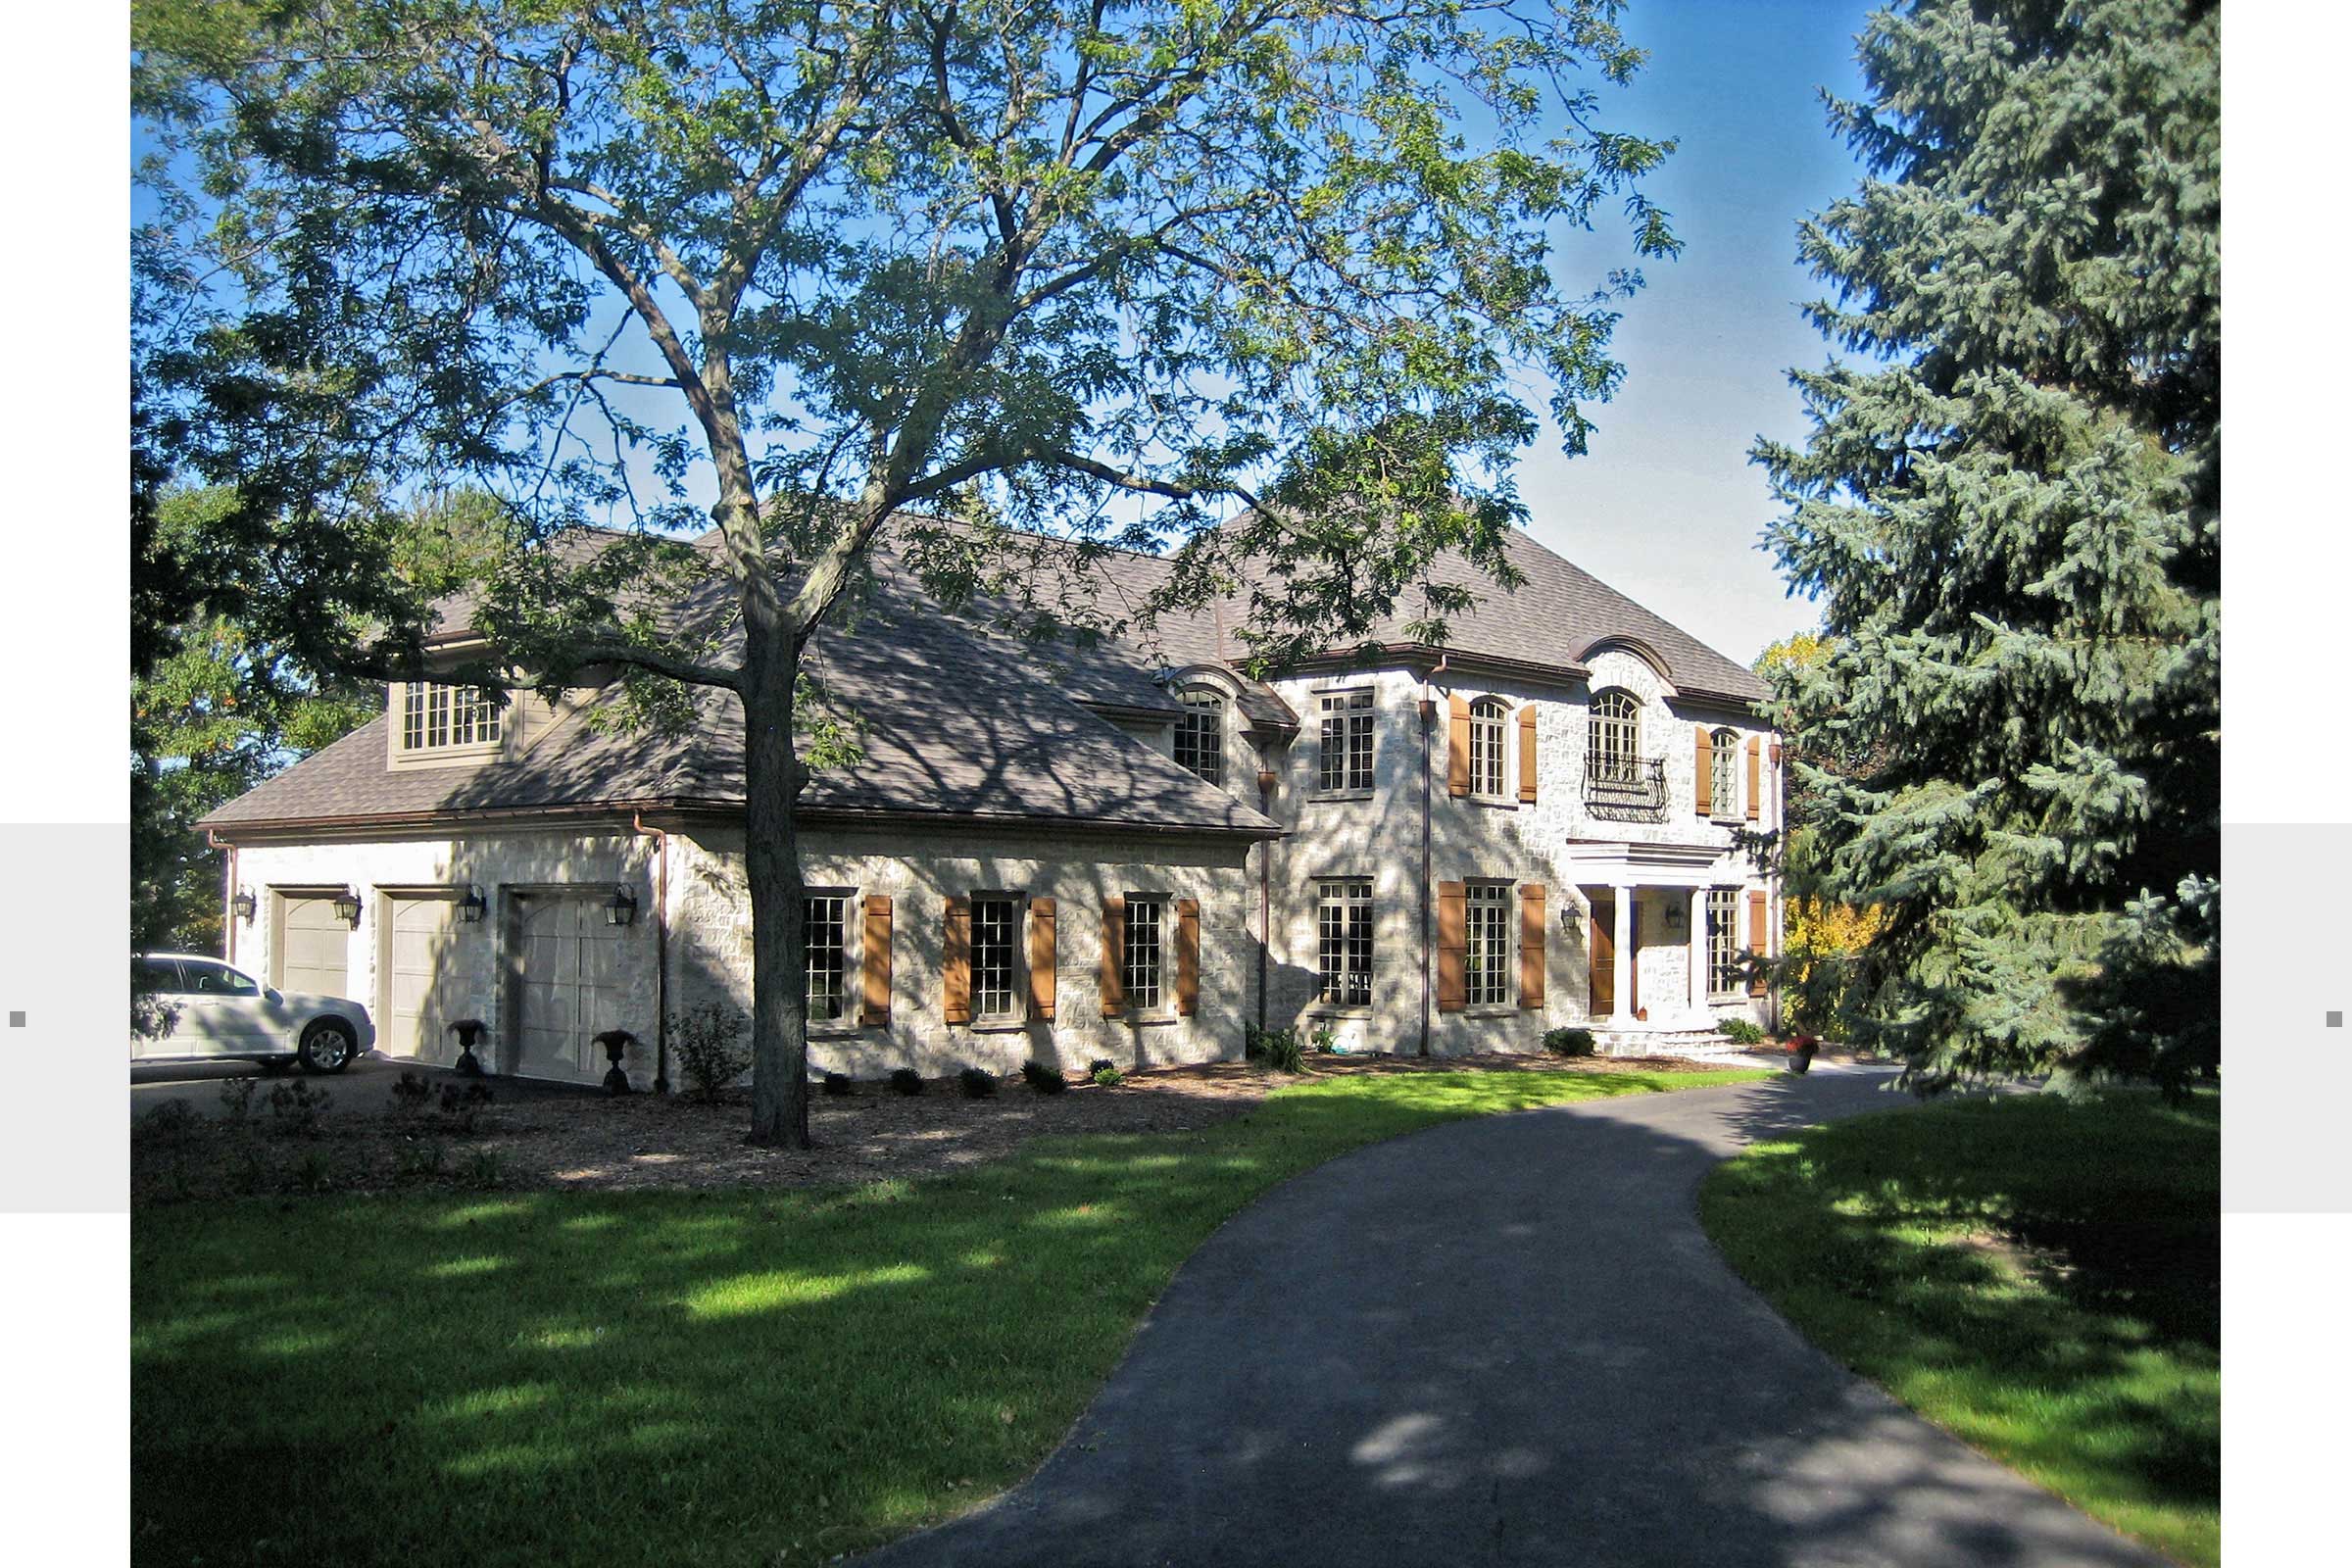 exterior view of large stone home with driveway